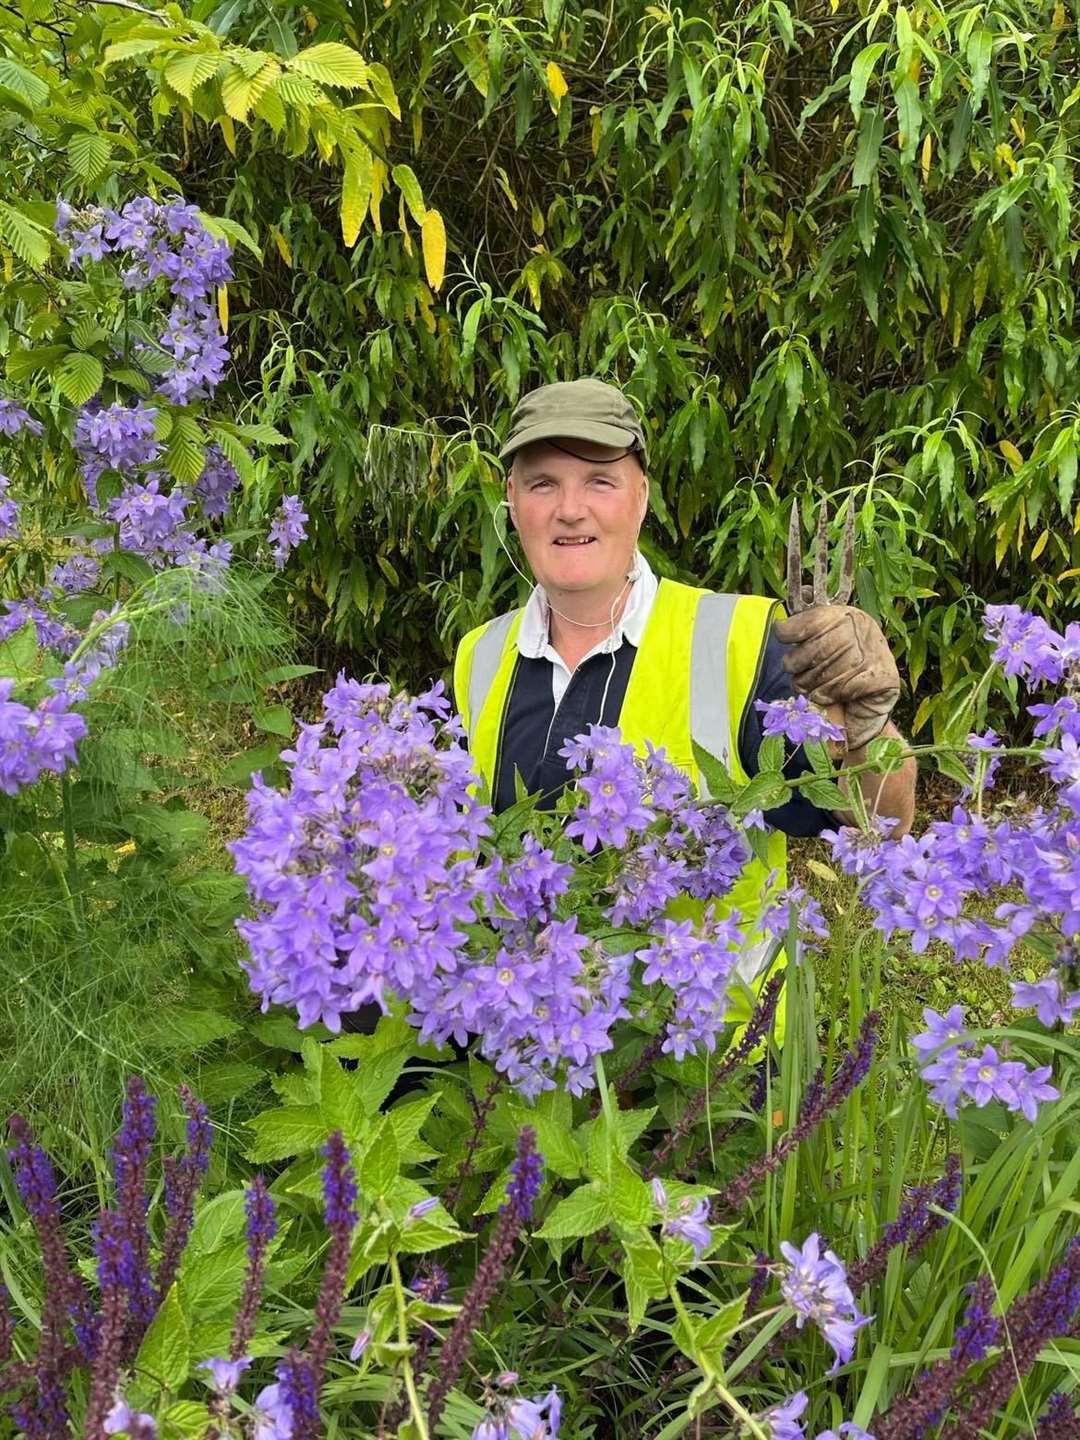 John Walmsley happy at his voluntary work in the UHI Inverness gardens.